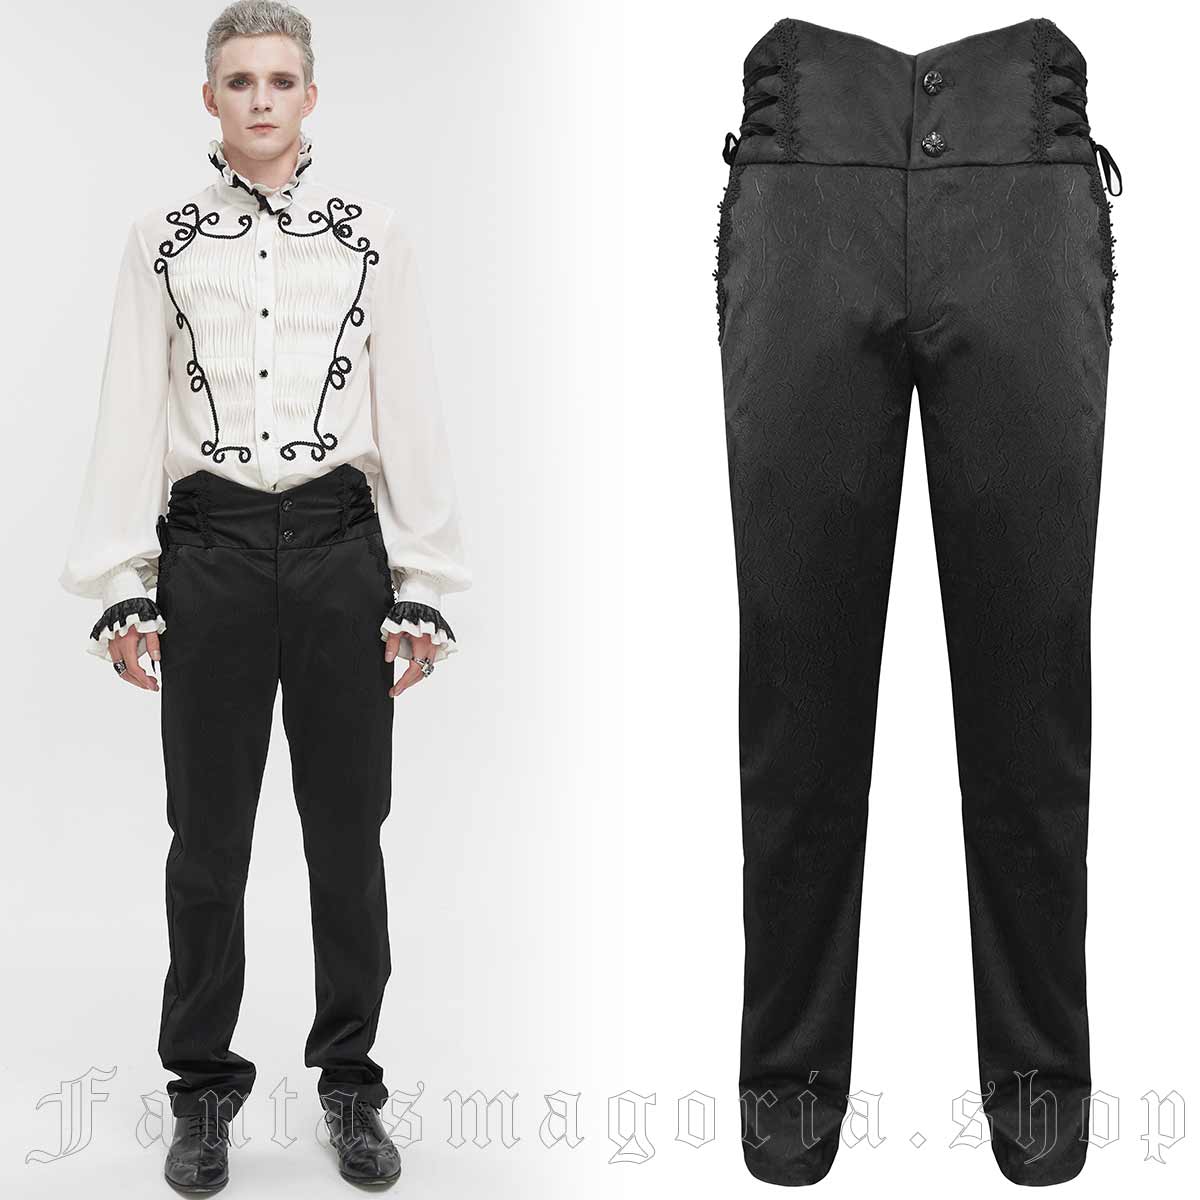 Men's classic Gothic black embossed ornamental fabric wide waistband trousers. - Devil Fashion - PT190